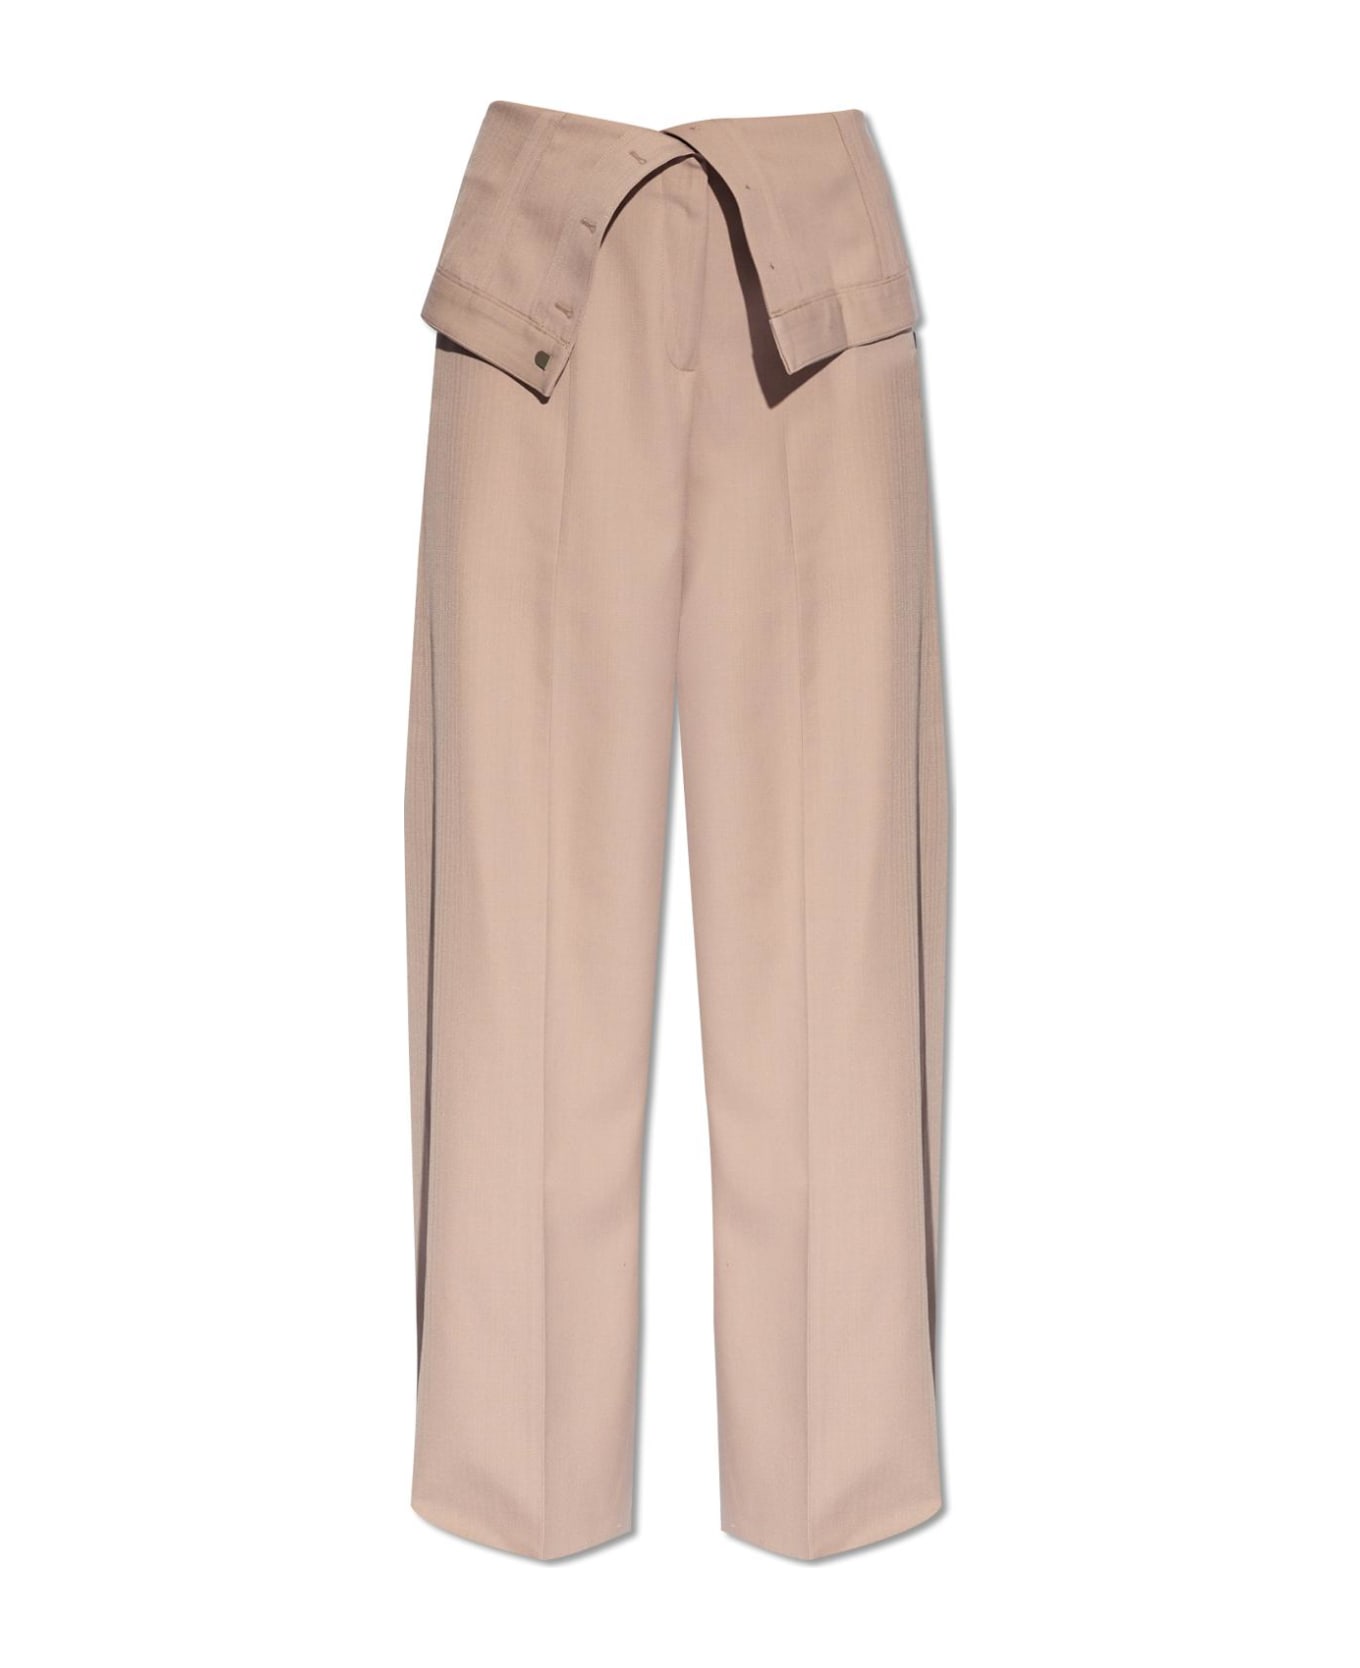 Acne Studios Tailored Trousers In Wool Blend - COLD BEIGE